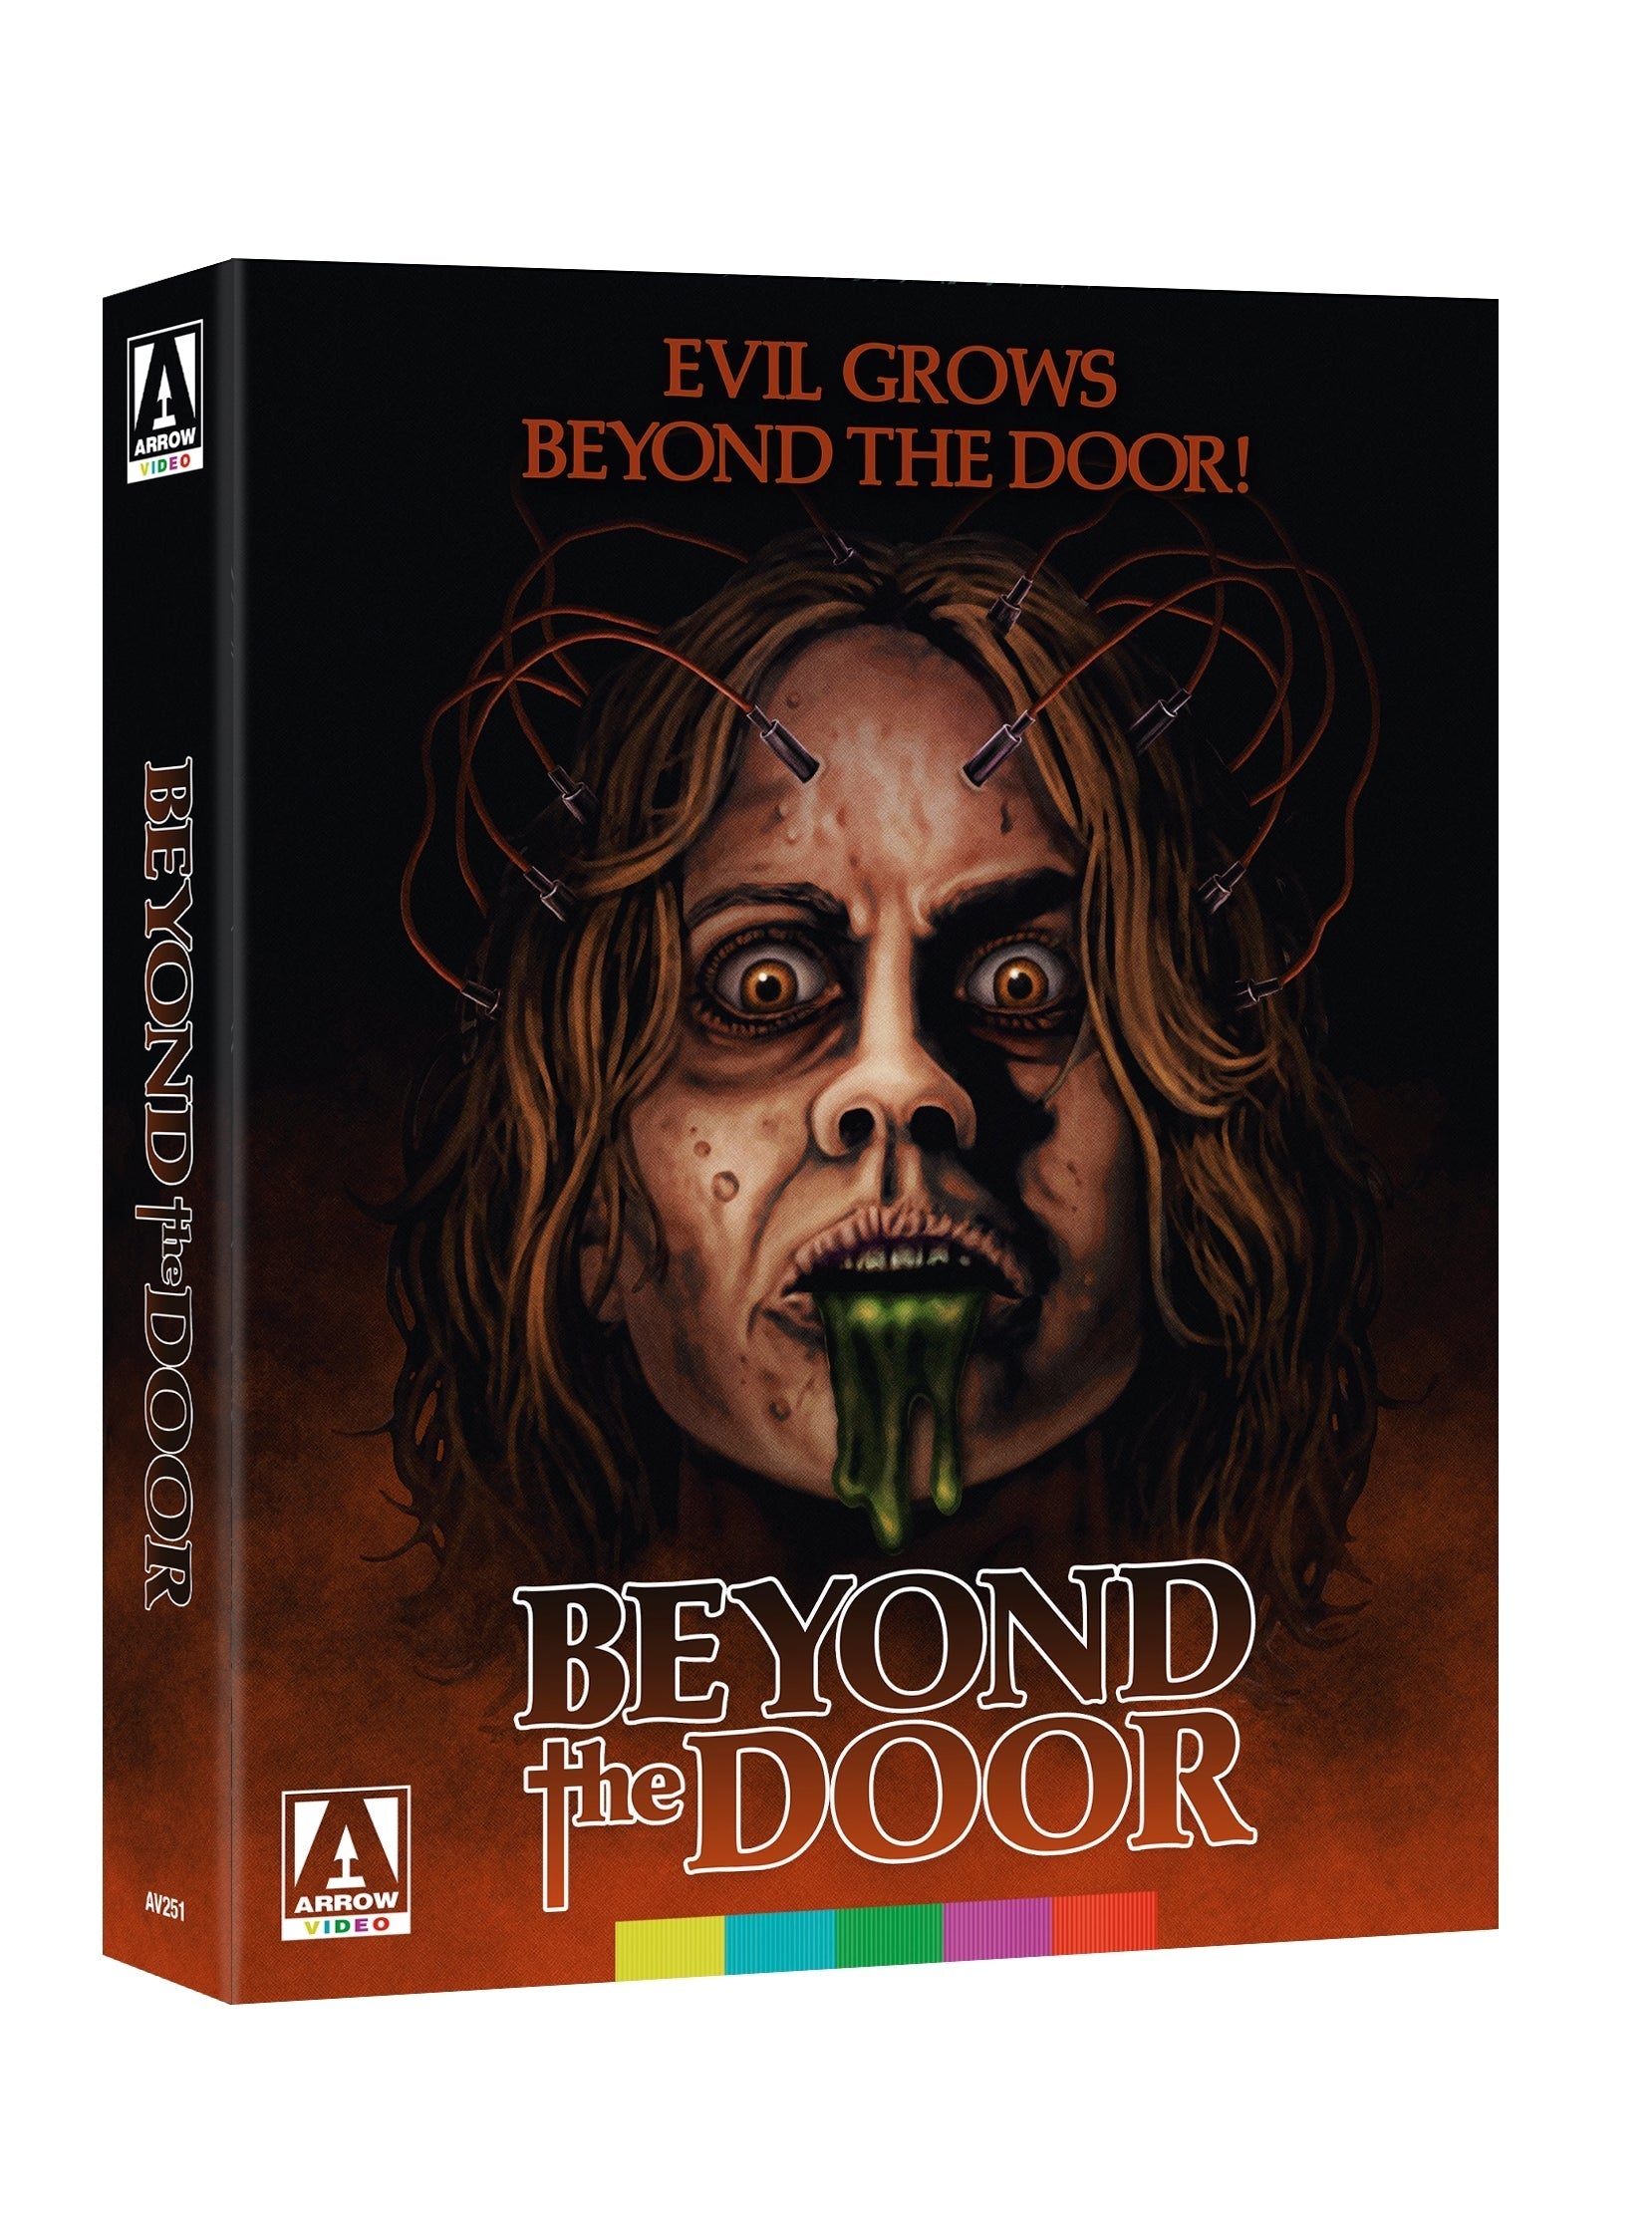 Beyond The Door (Limited Edition) Blu-Ray Blu-Ray